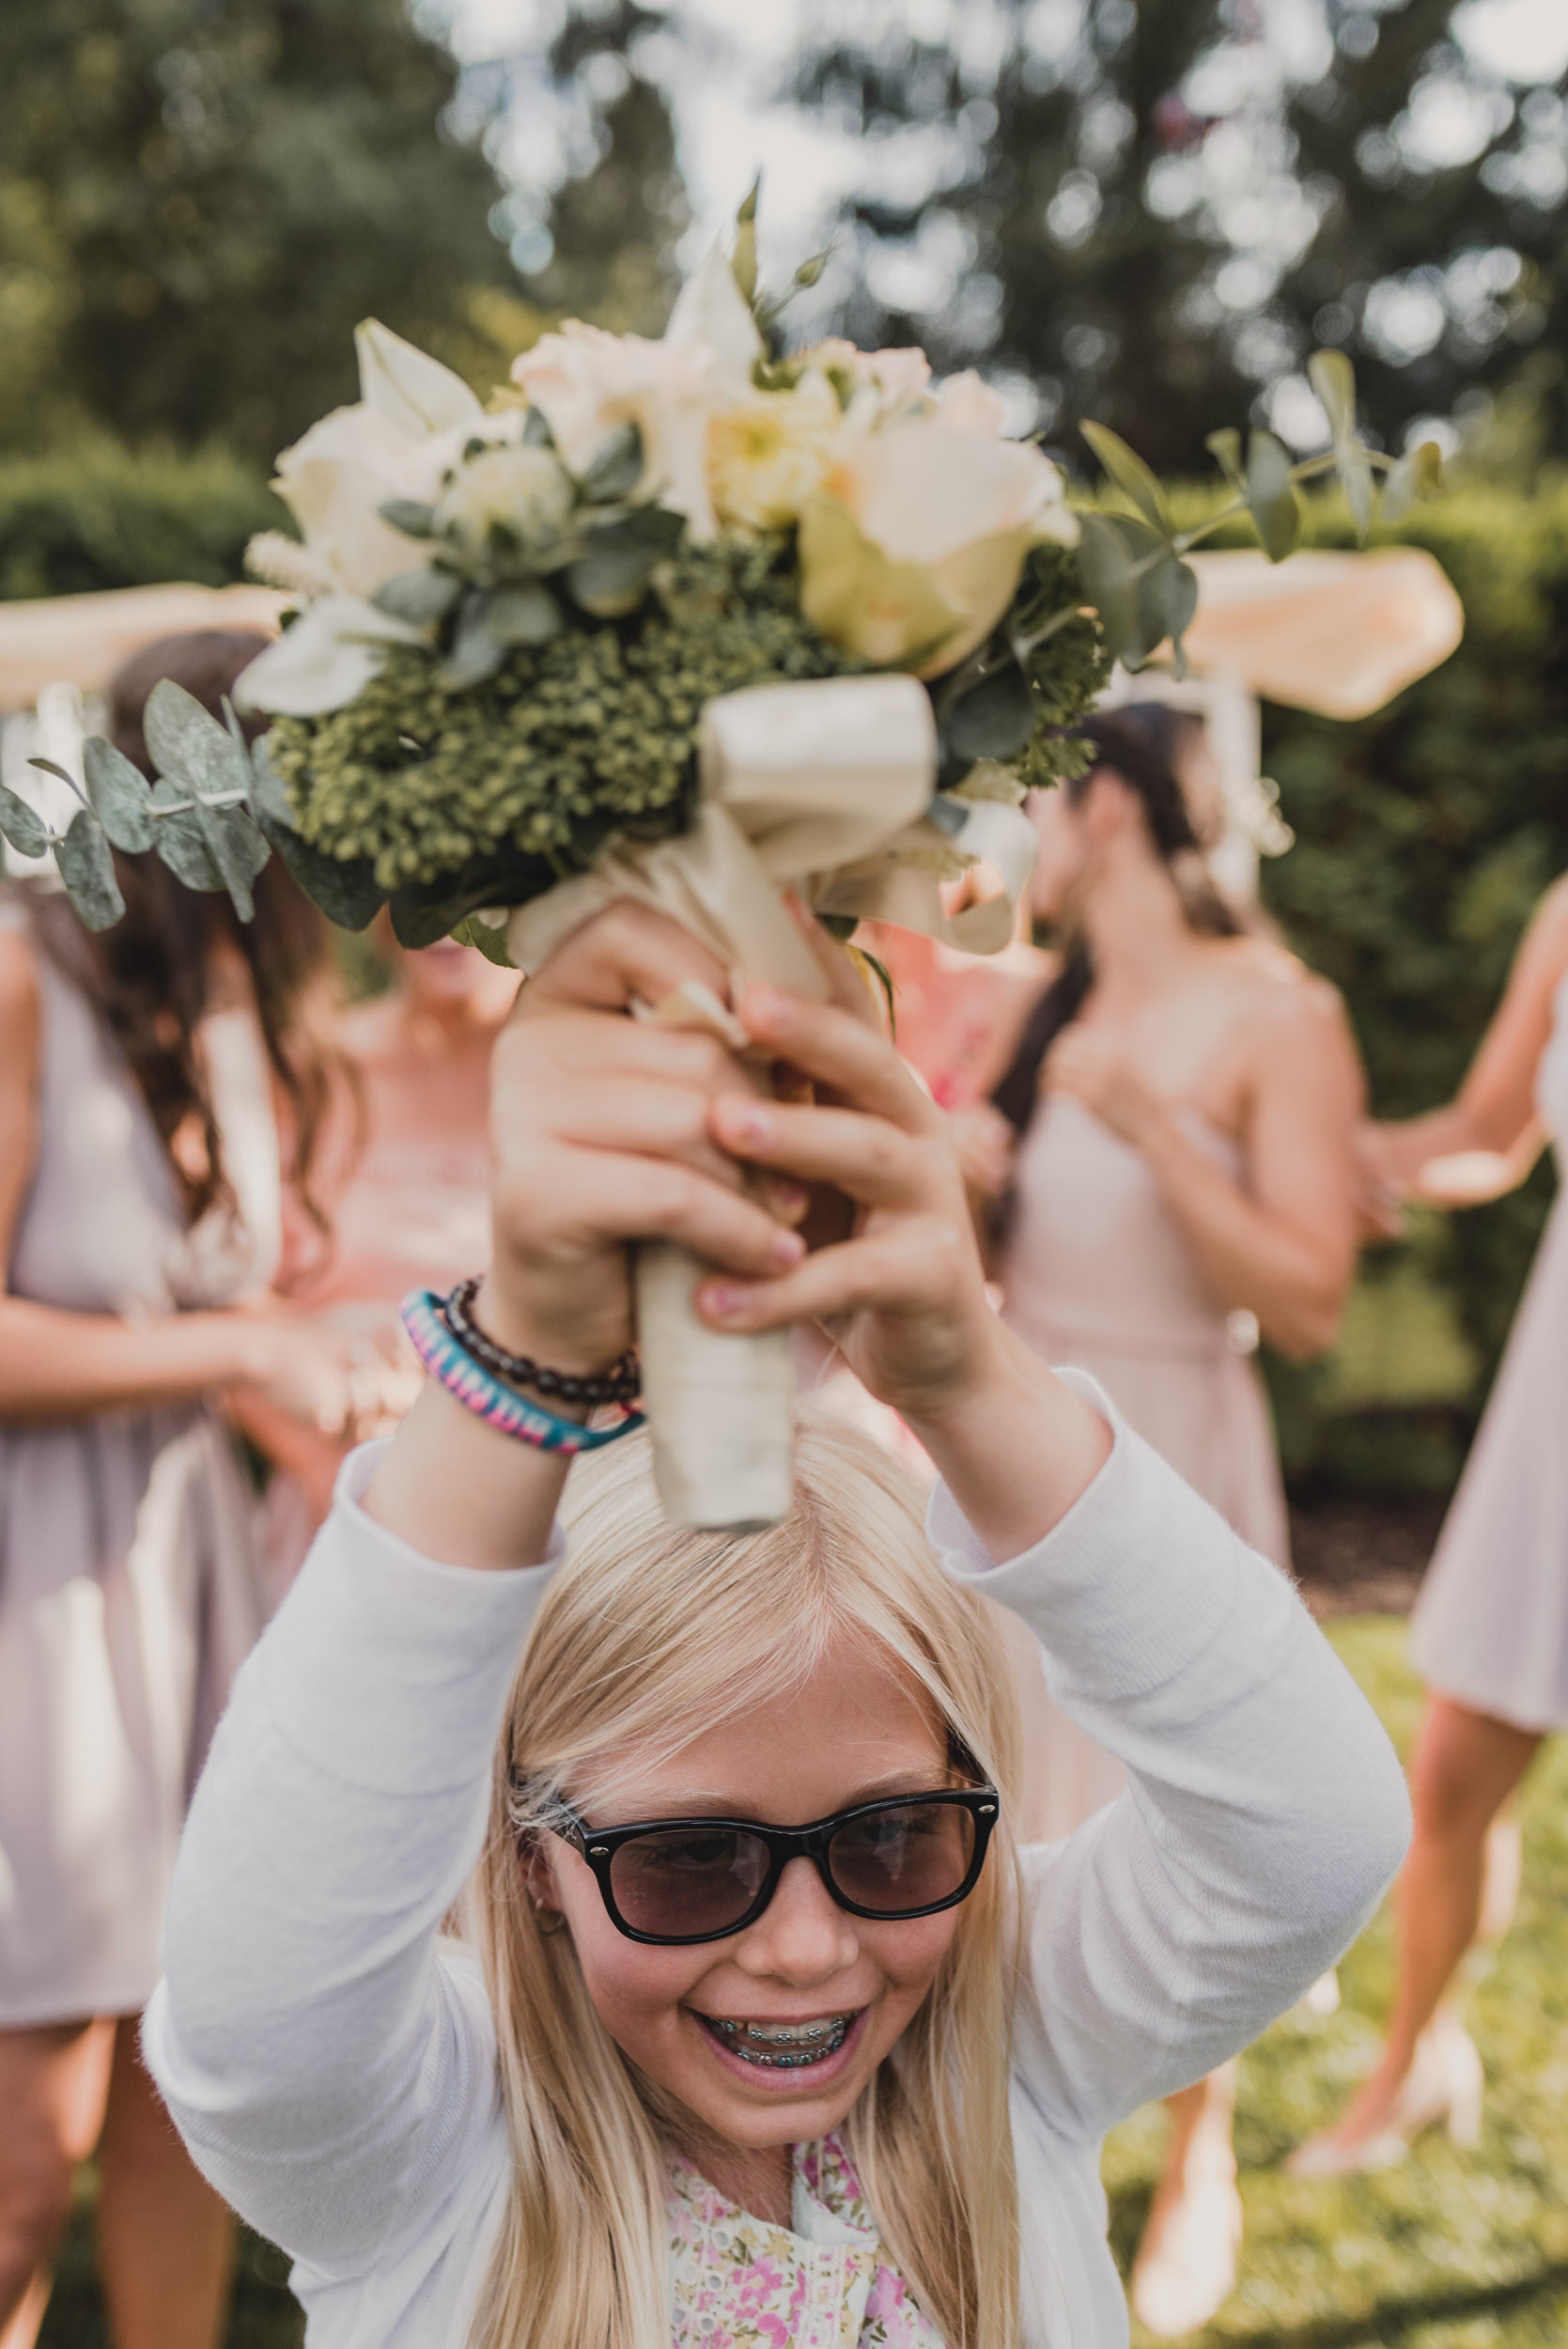 Young guest catches bouquet